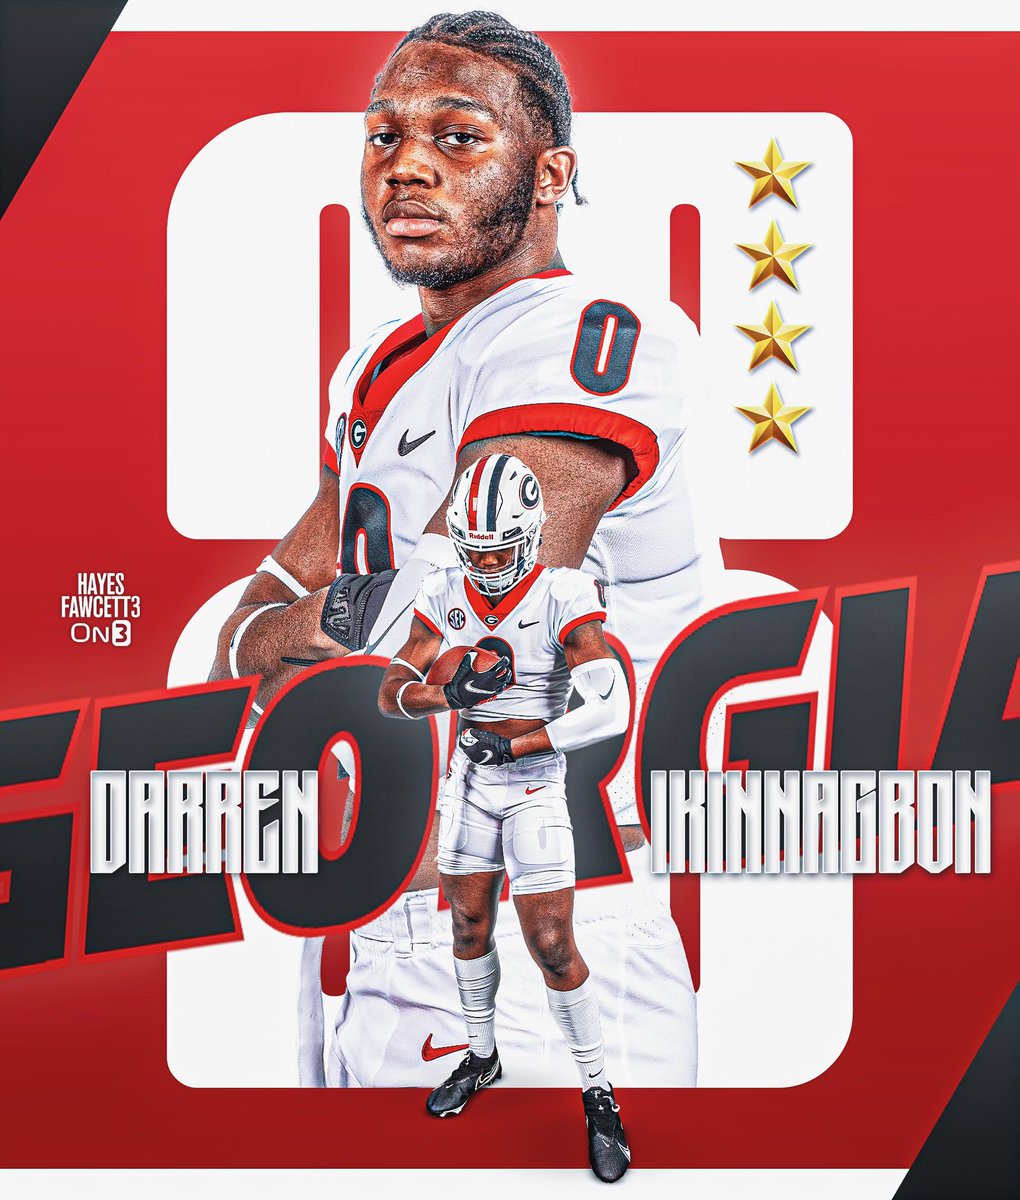 BREAKING: Four-Star EDGE Darren Ikinnagbon has Committed to Georgia, he tells me for @on3recruits The 6’6 250 EDGE from Hillside, NJ chose the Bulldogs over Ohio State & Notre Dame Ranked as a Top 60 Recruit in 2025 (per On3) “I want to be great.” on3.com/db/darren-ikin…